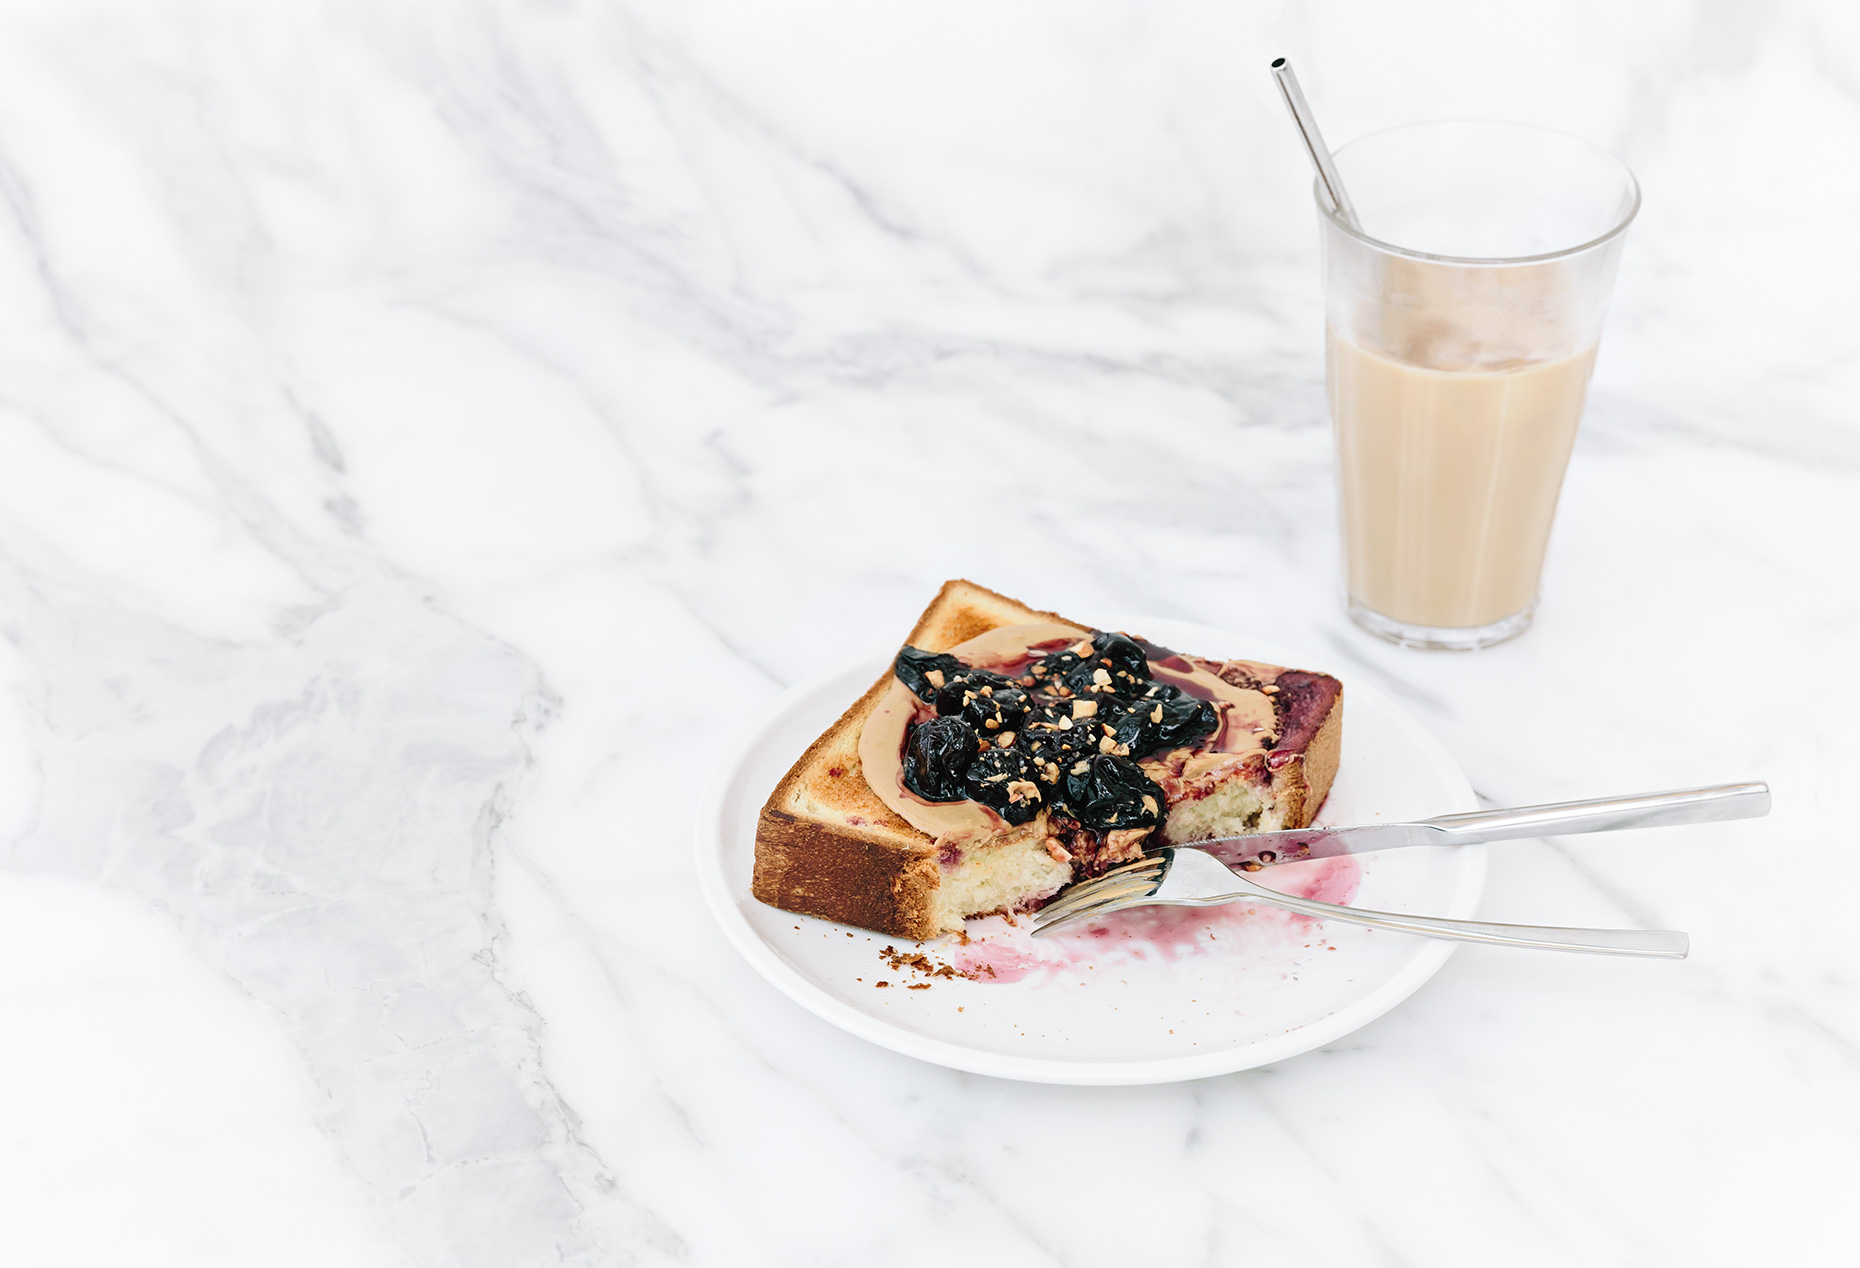 Kristin Teig Photography | cashew butter toast with cherries